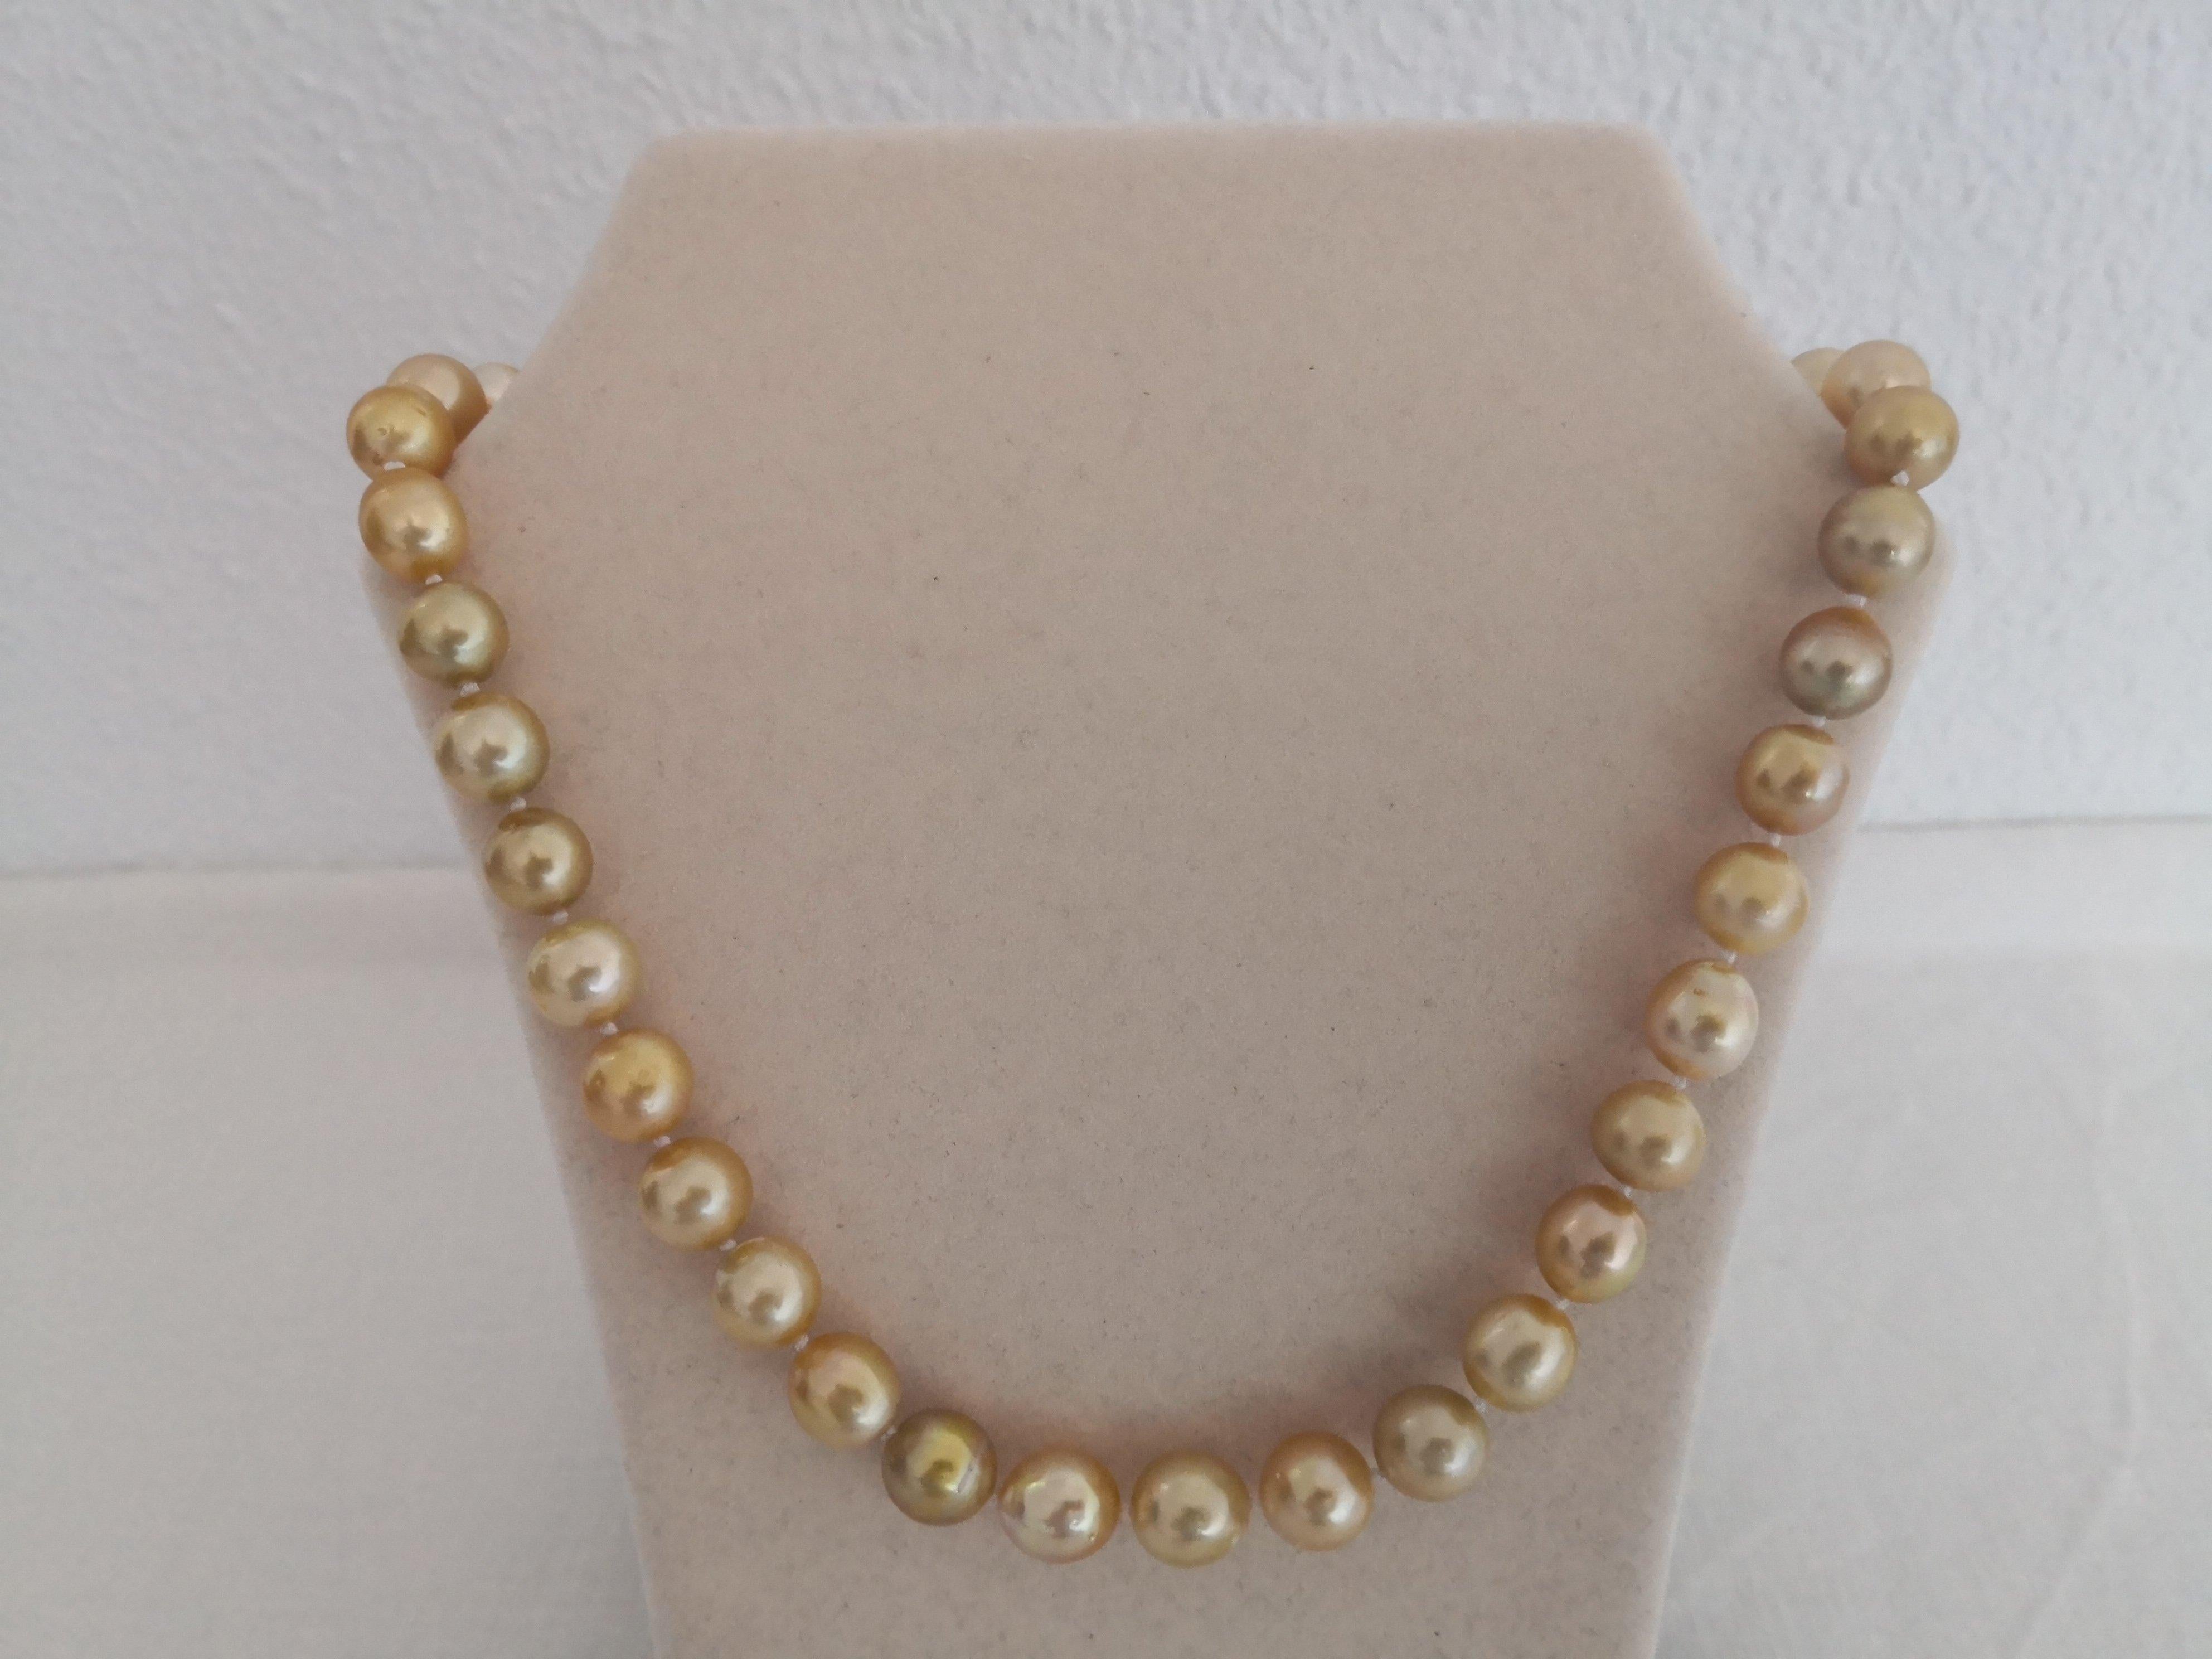 A Natural Color South Sea Pearls necklace

- Size of Pearls 9-10 mm of diameter

- Pearls from Pinctada Maxima Oyster

- Origin: Indonesia ocean waters

- Natural Deep Golden Color

- High Natural luster and Orient

- Pearls of semi-round shape

-